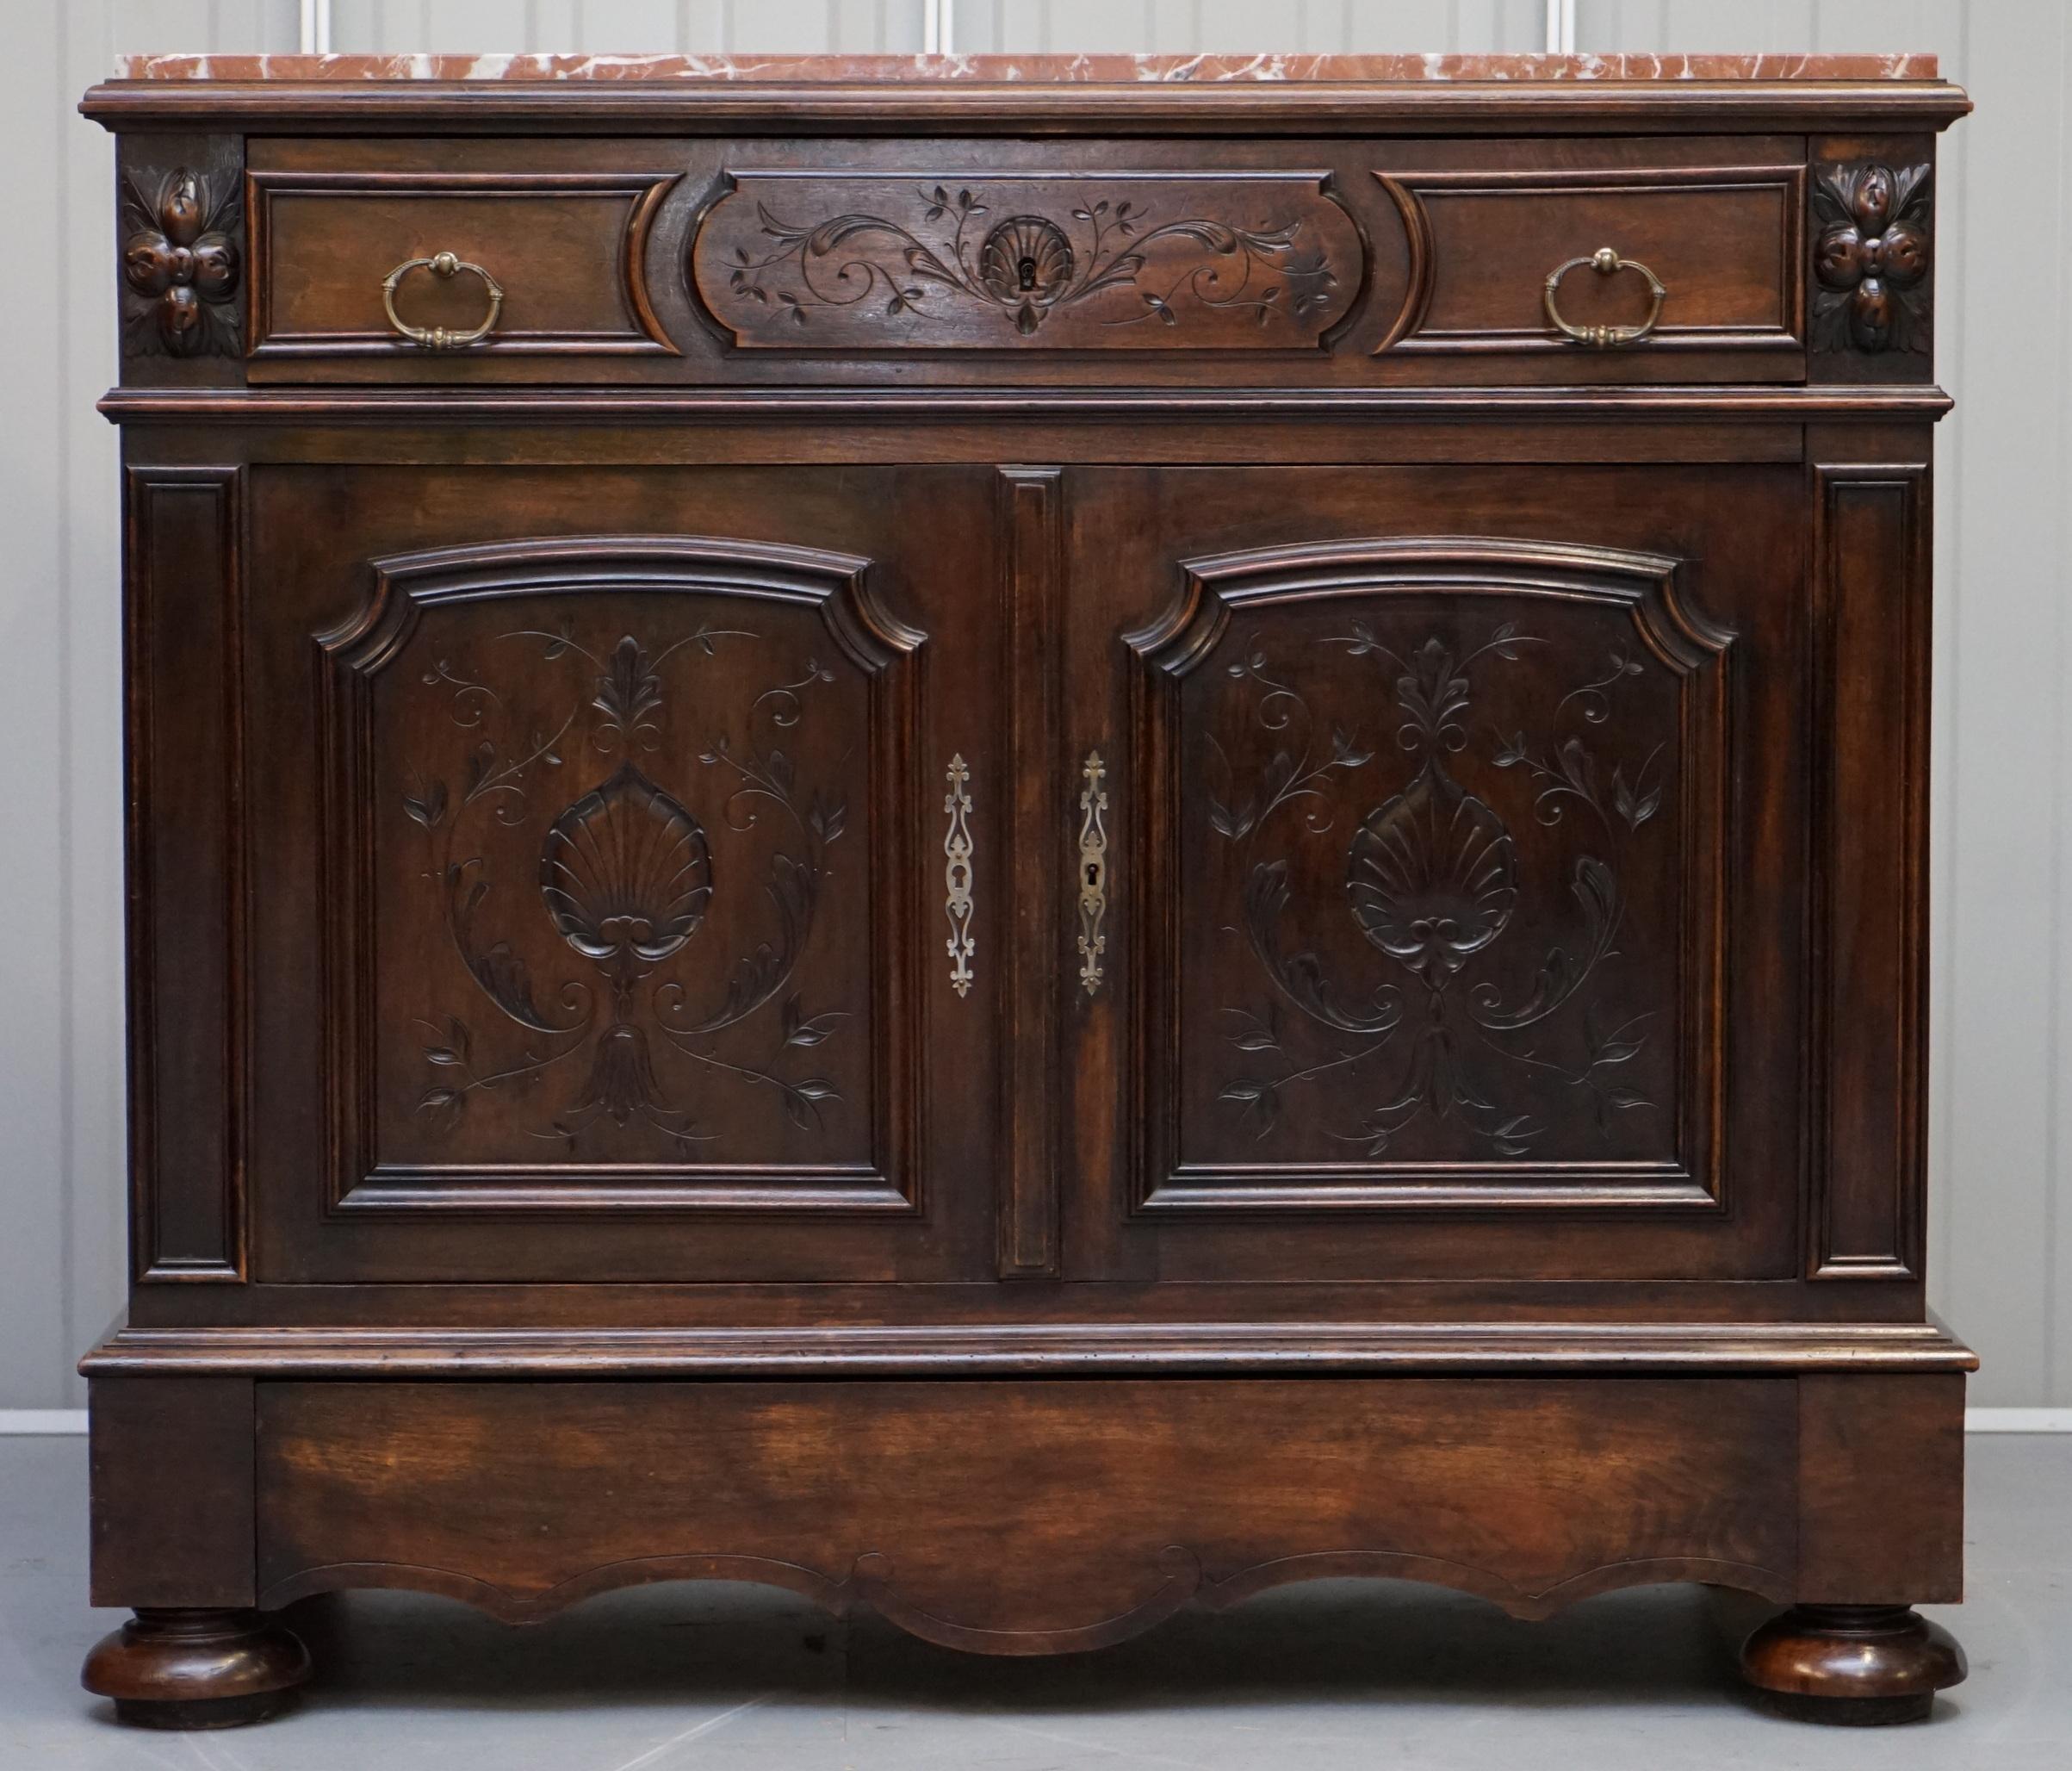 We are delighted to offer for sale this absolutely stunning original Victorian walnut with satinwood drawers and marble top sideboard with extra hidden silverware drawer

A very versatile and good looking piece. Its like a sideboard but has linen